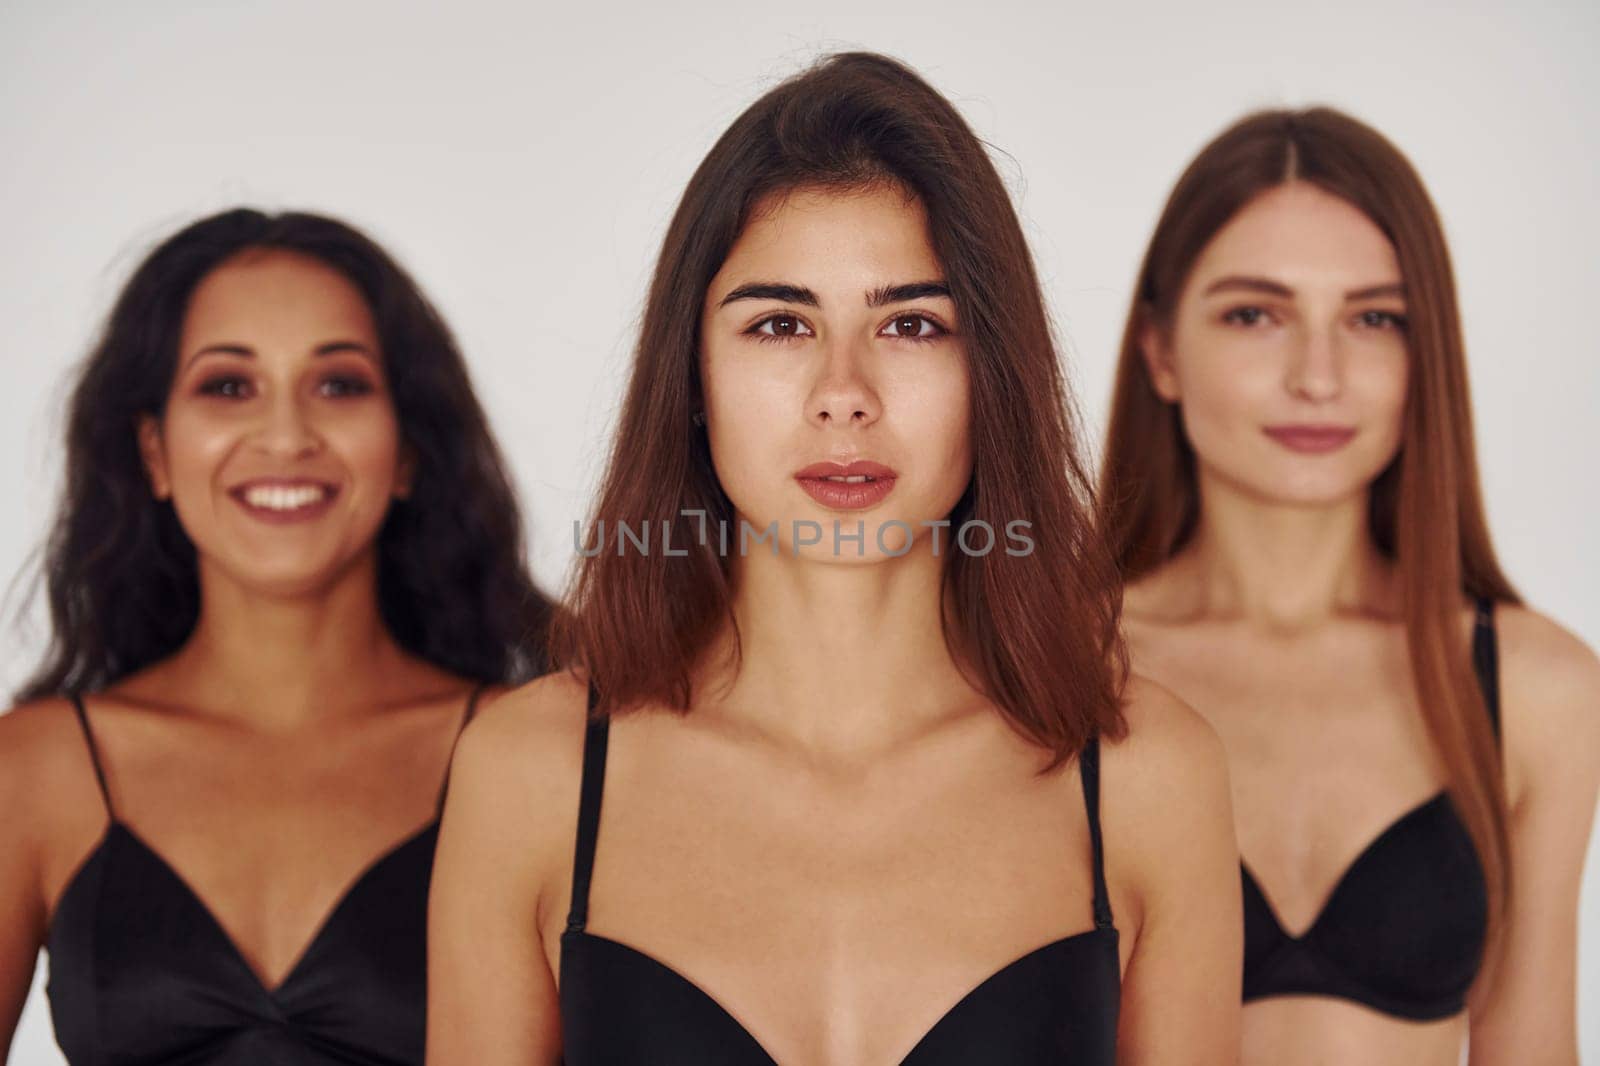 In black bra. Three young women in lingerie together indoors. White background by Standret